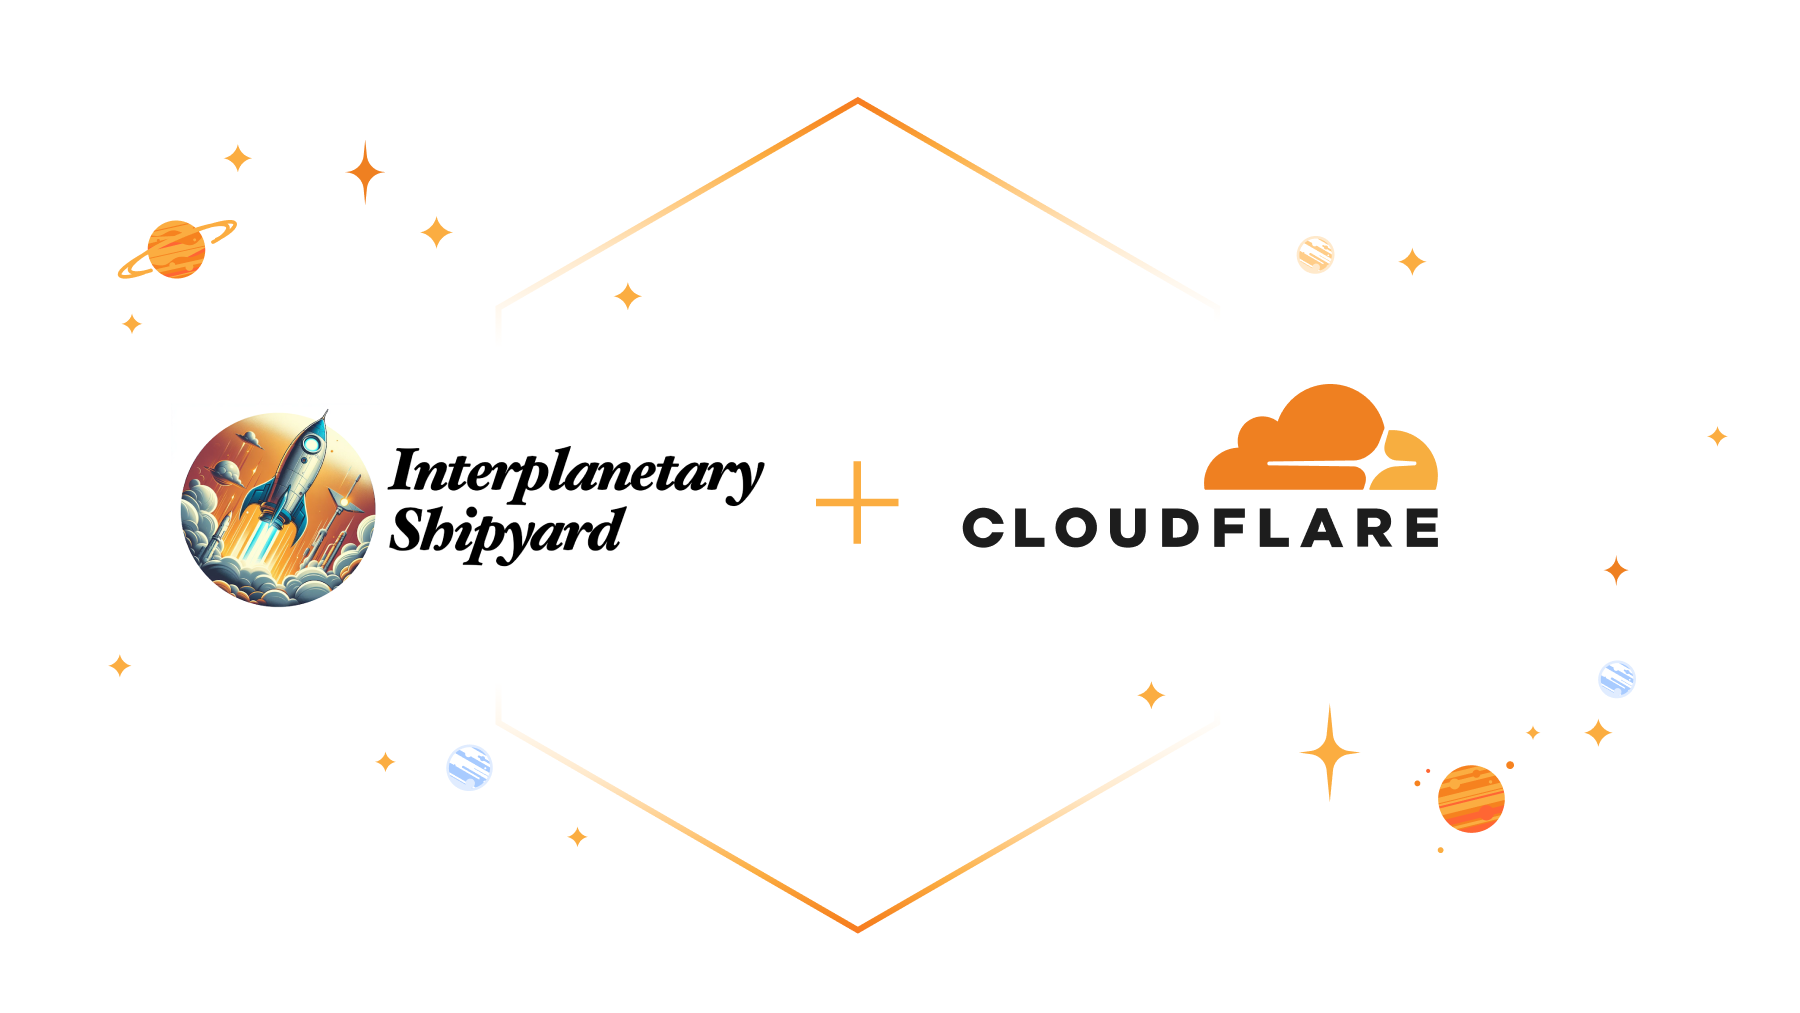 Cloudflare’s public IPFS gateways and supporting Interplanetary Shipyard